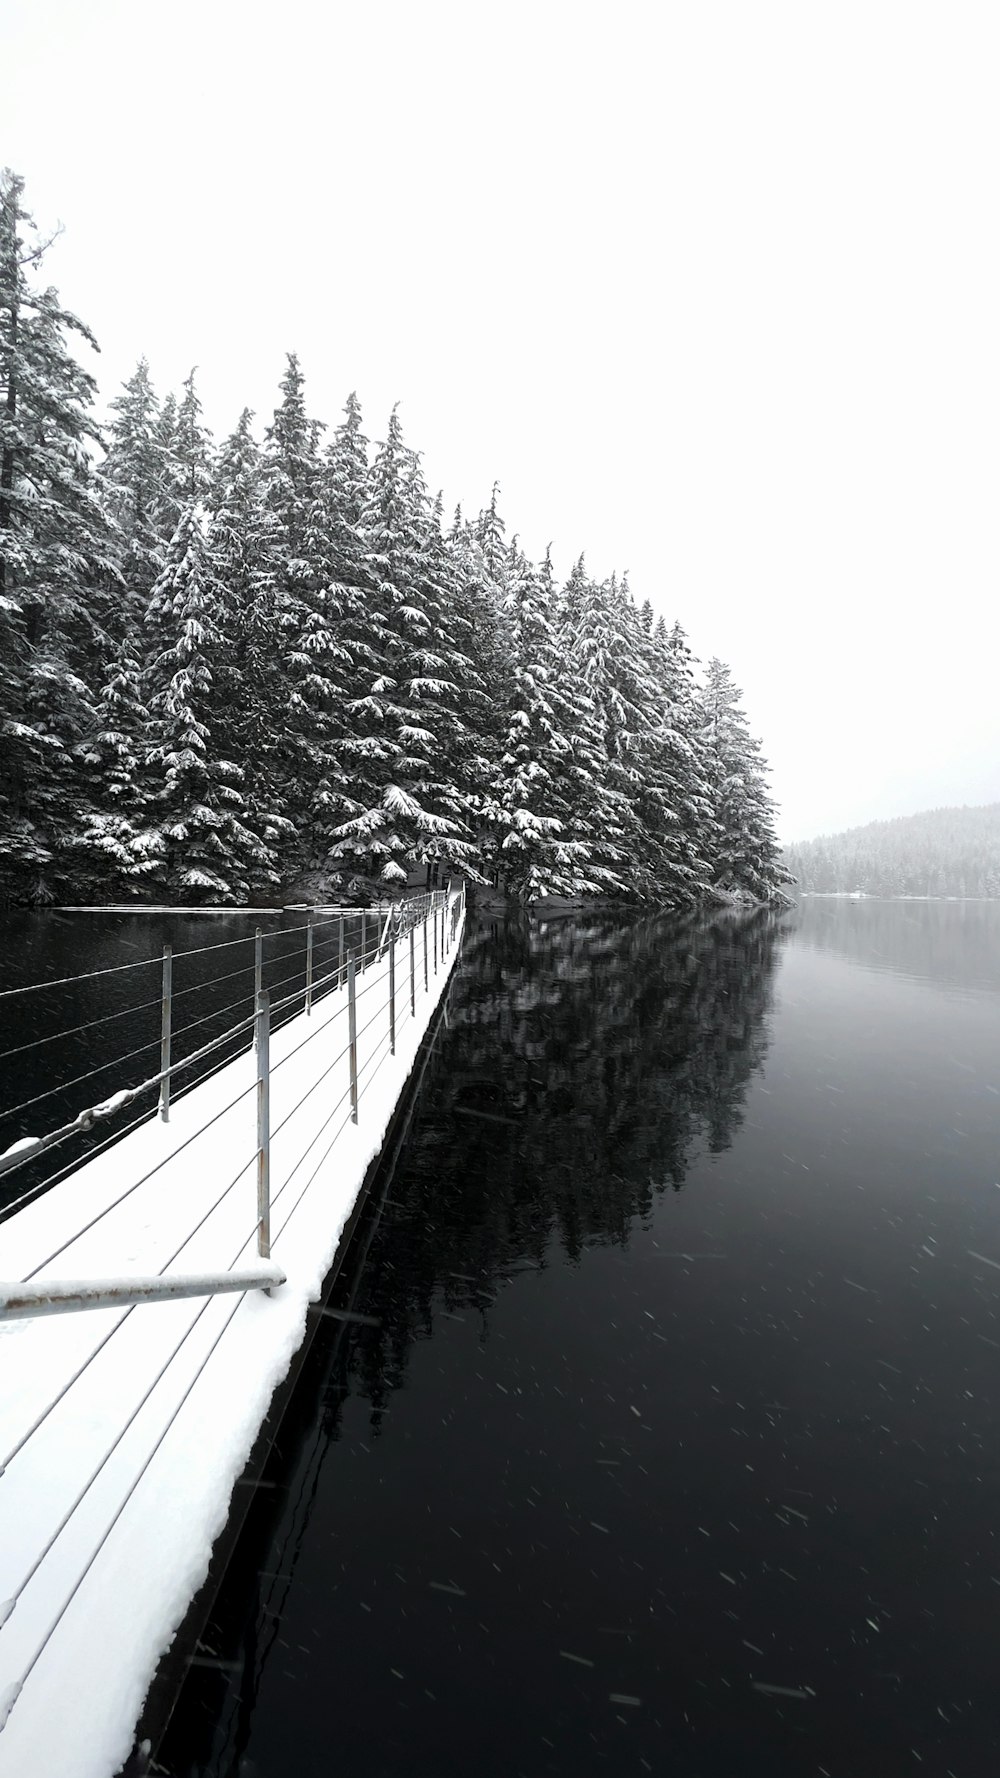 a snow covered forest next to a body of water